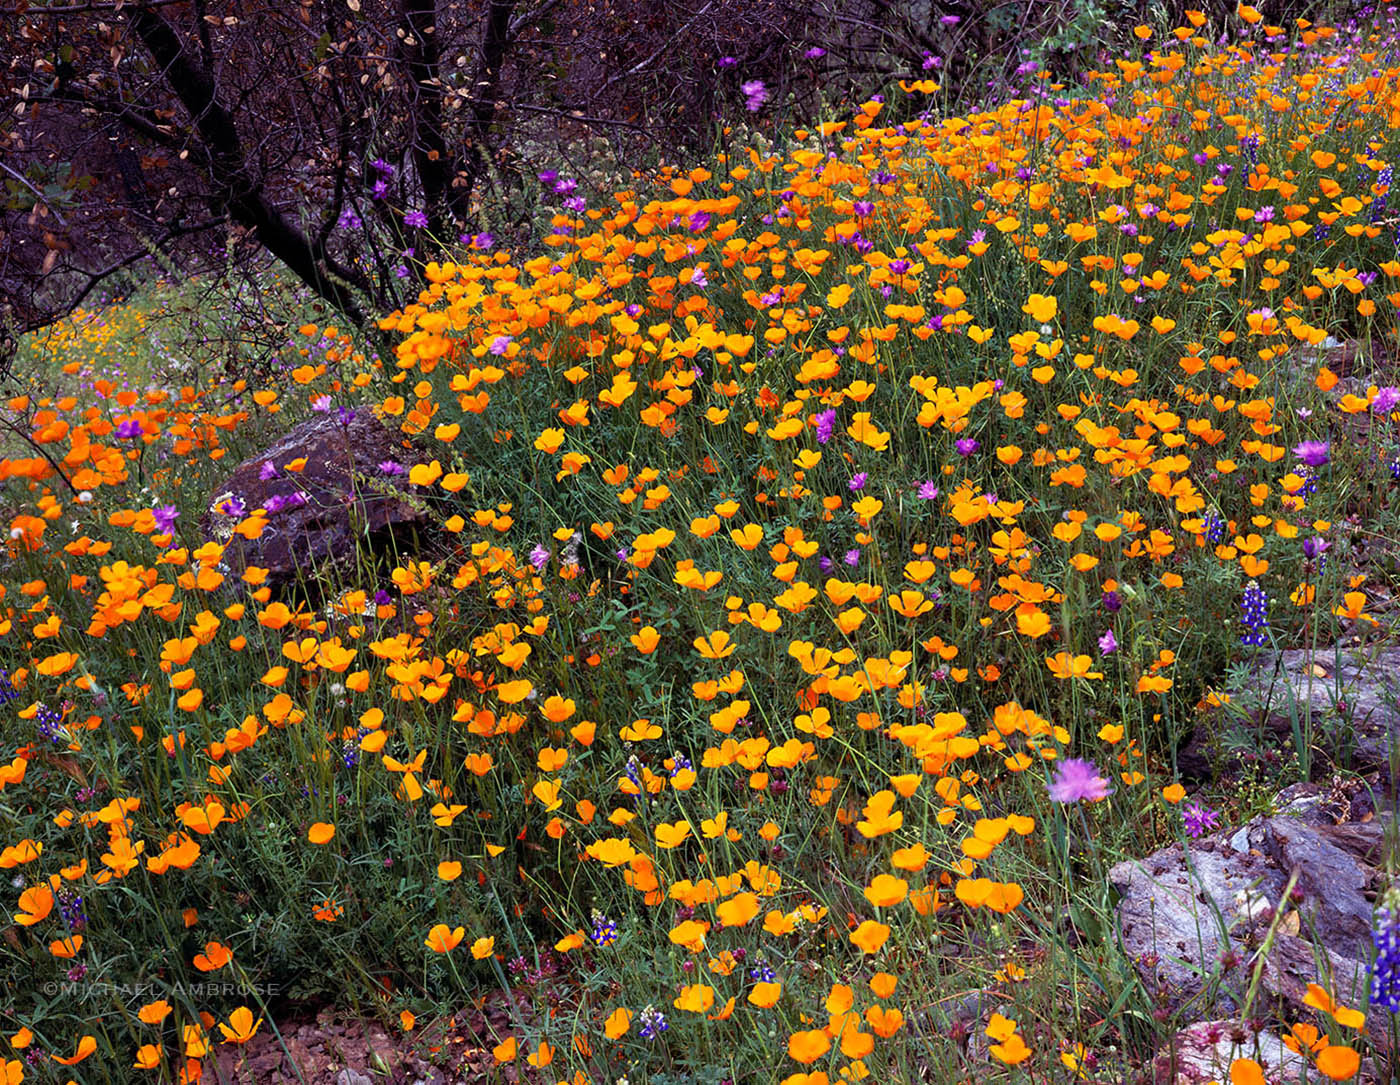 Poppies and Wildflowers rewarded my steep hike in the Merced River Canyon near Yosemite National Park, California.